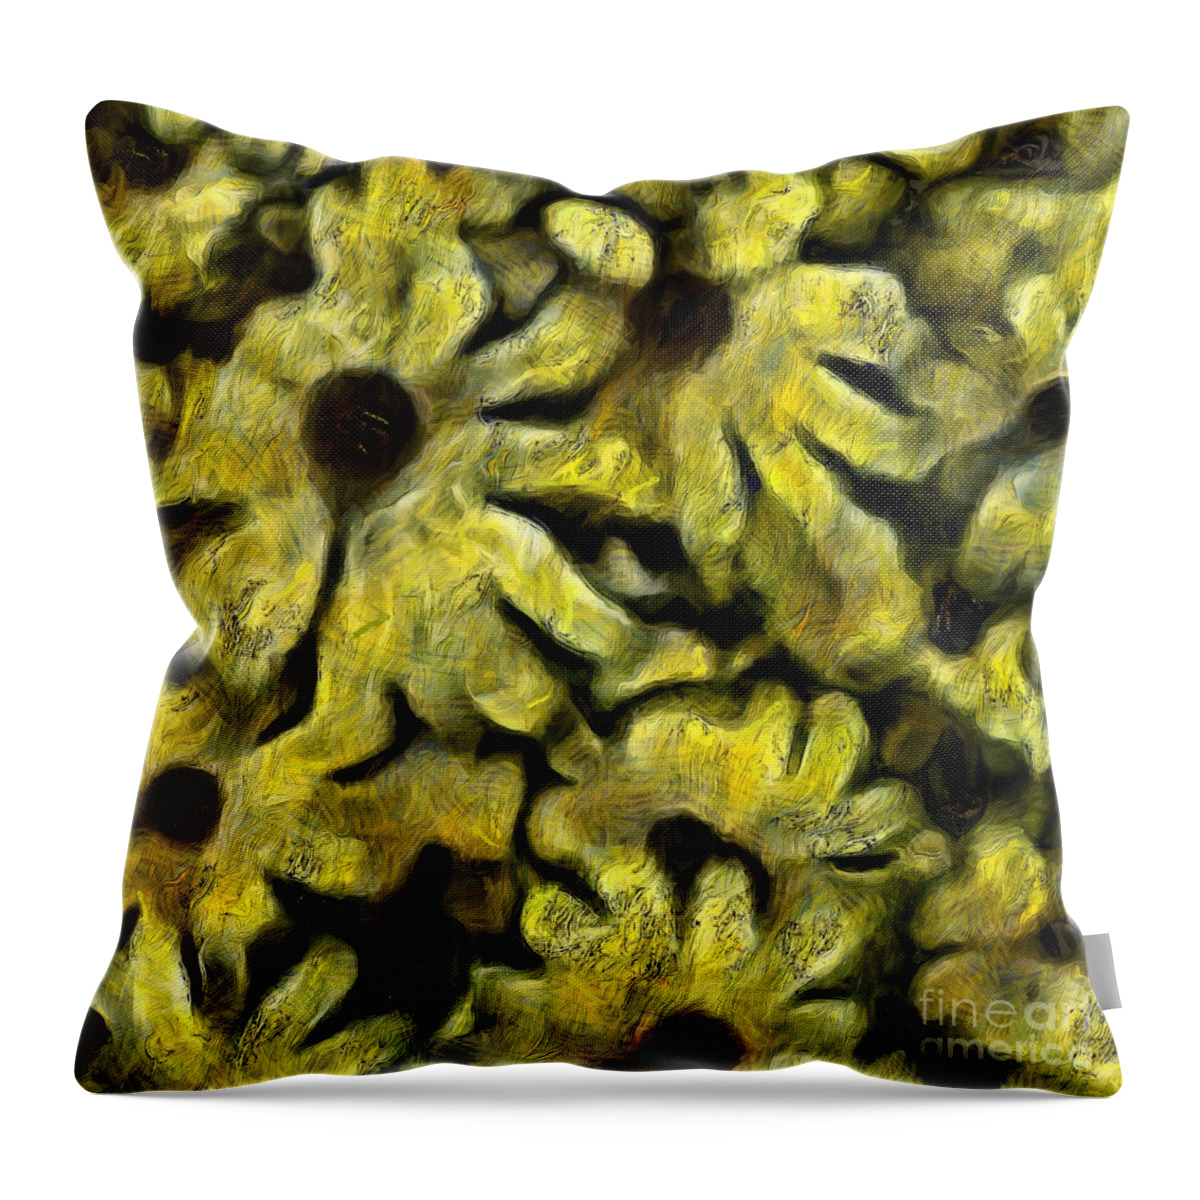 Abstract Throw Pillow featuring the digital art Flowers #3 by Bruce Rolff